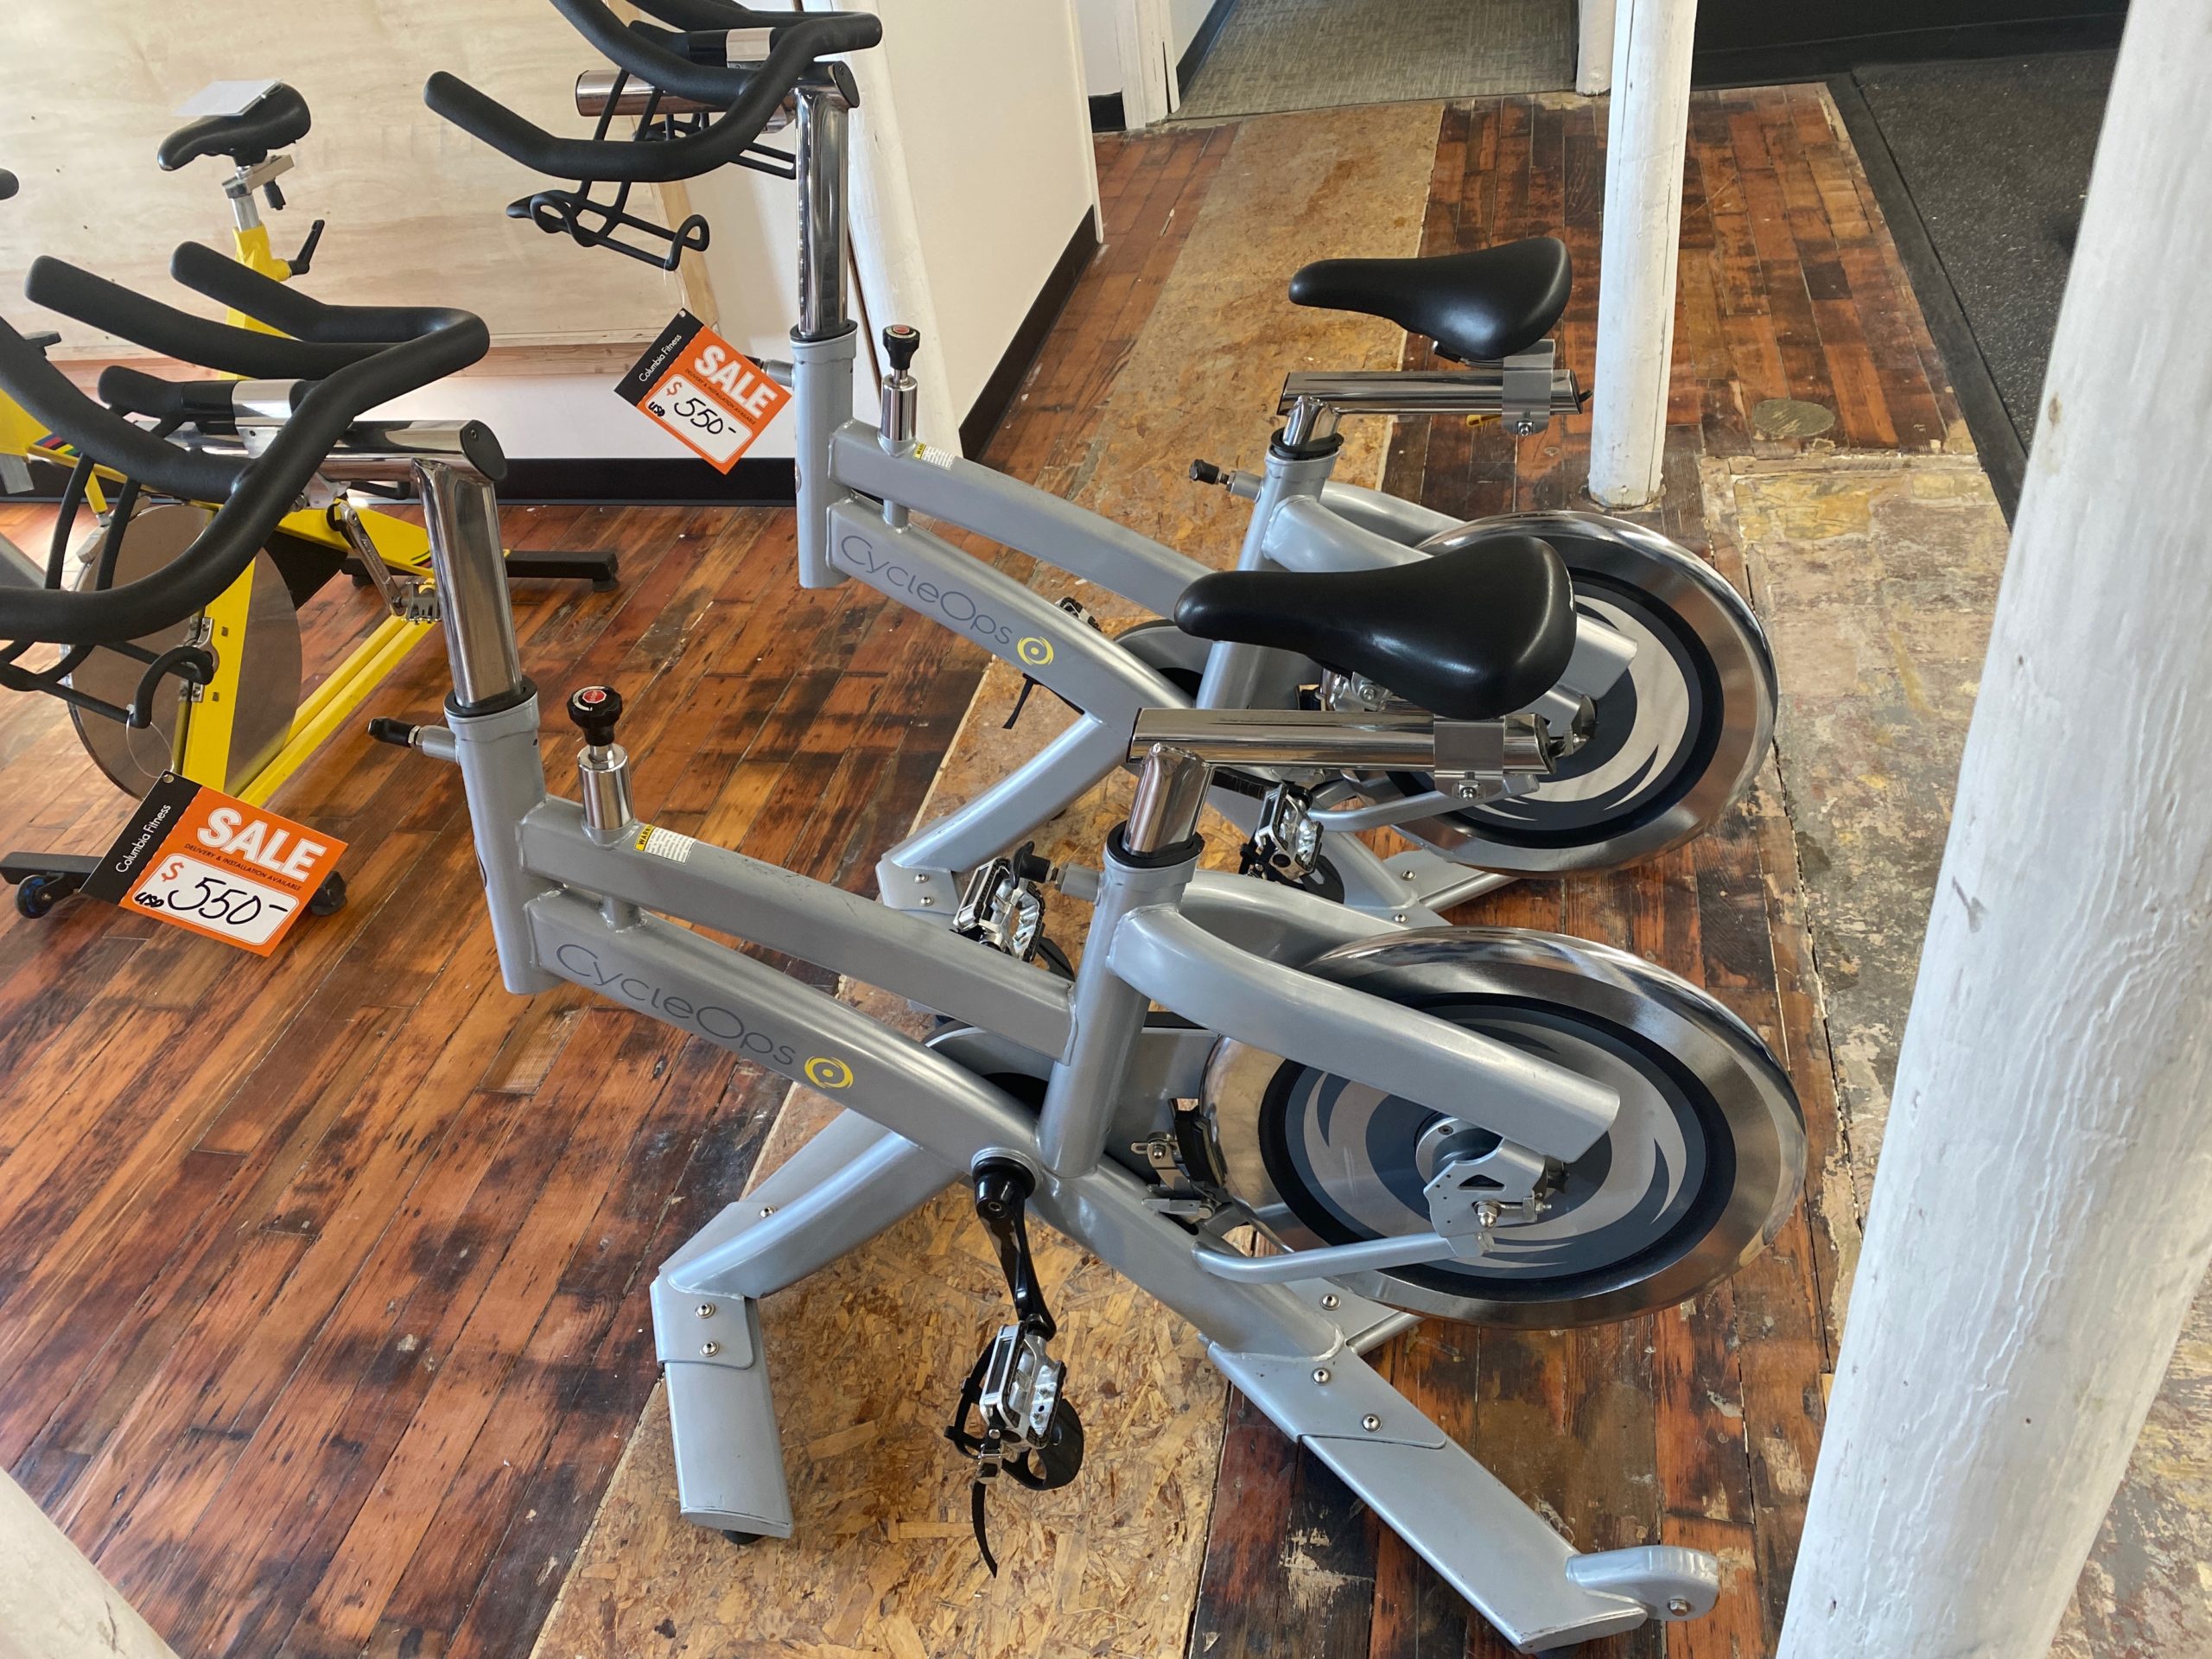 used spin bikes near me